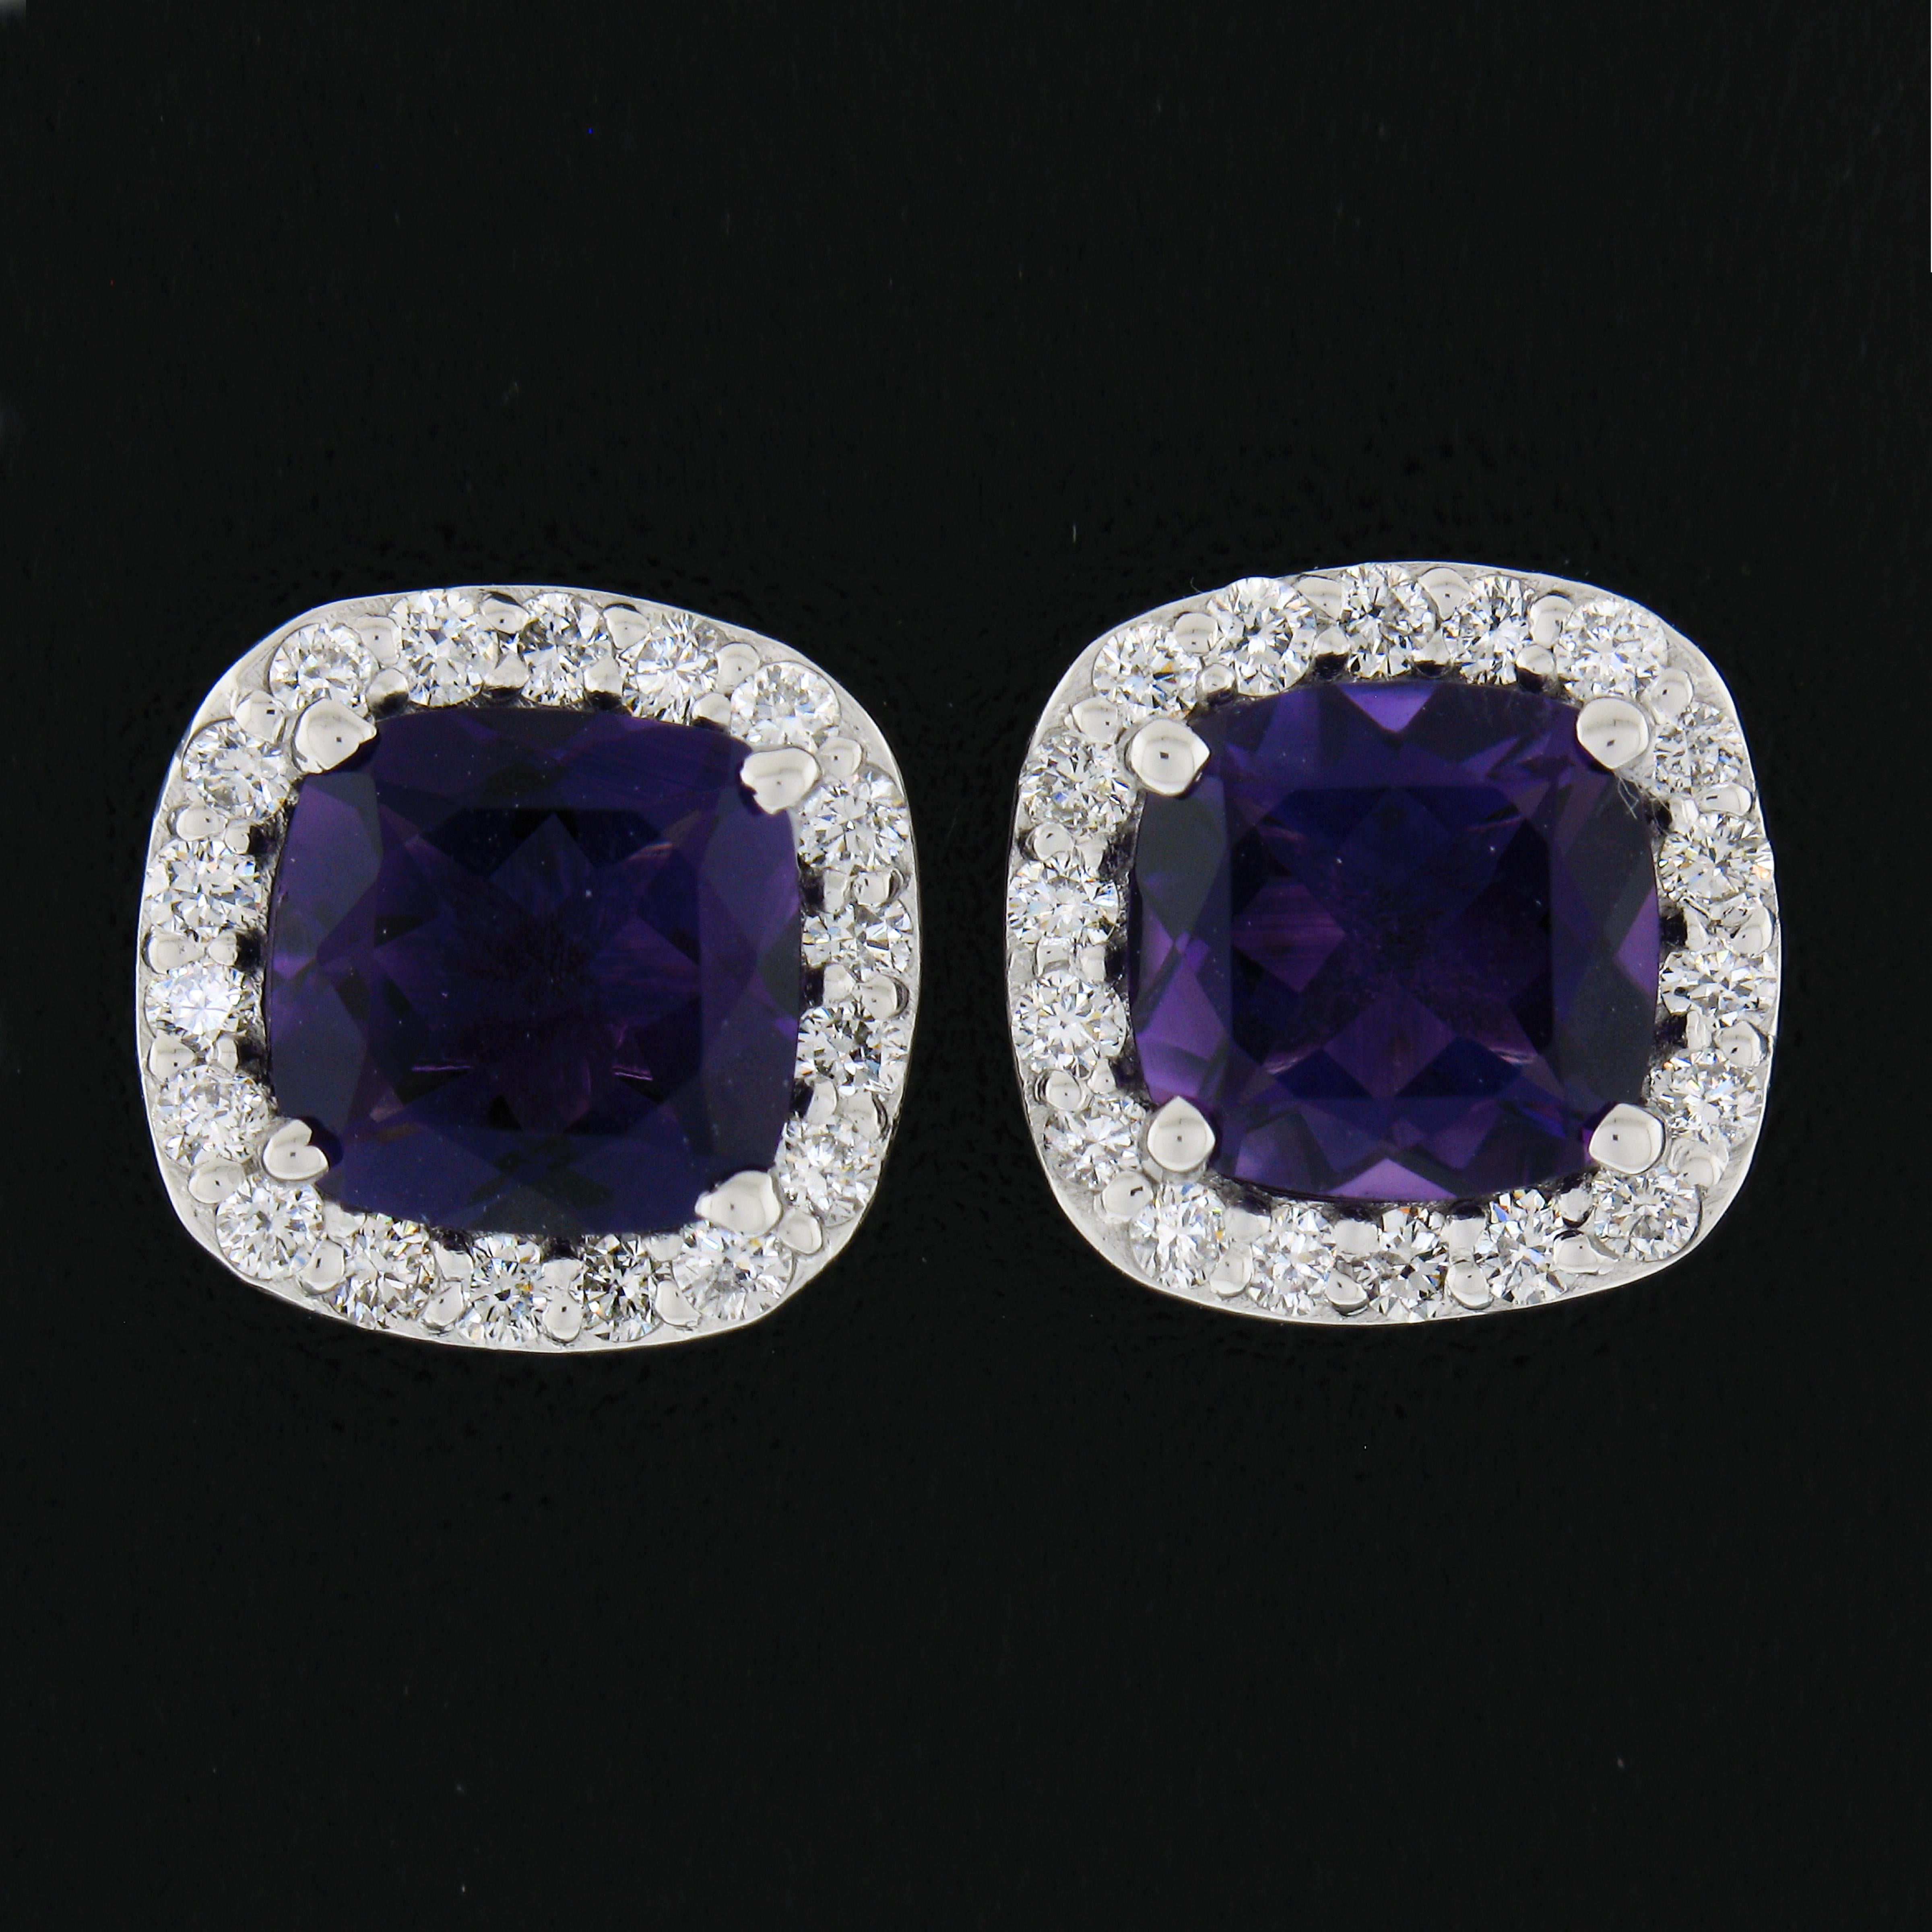 18k White Gold 2.93ct Cushion Royal Purple Amethyst & Diamond Halo Stud Earrings In New Condition For Sale In Montclair, NJ